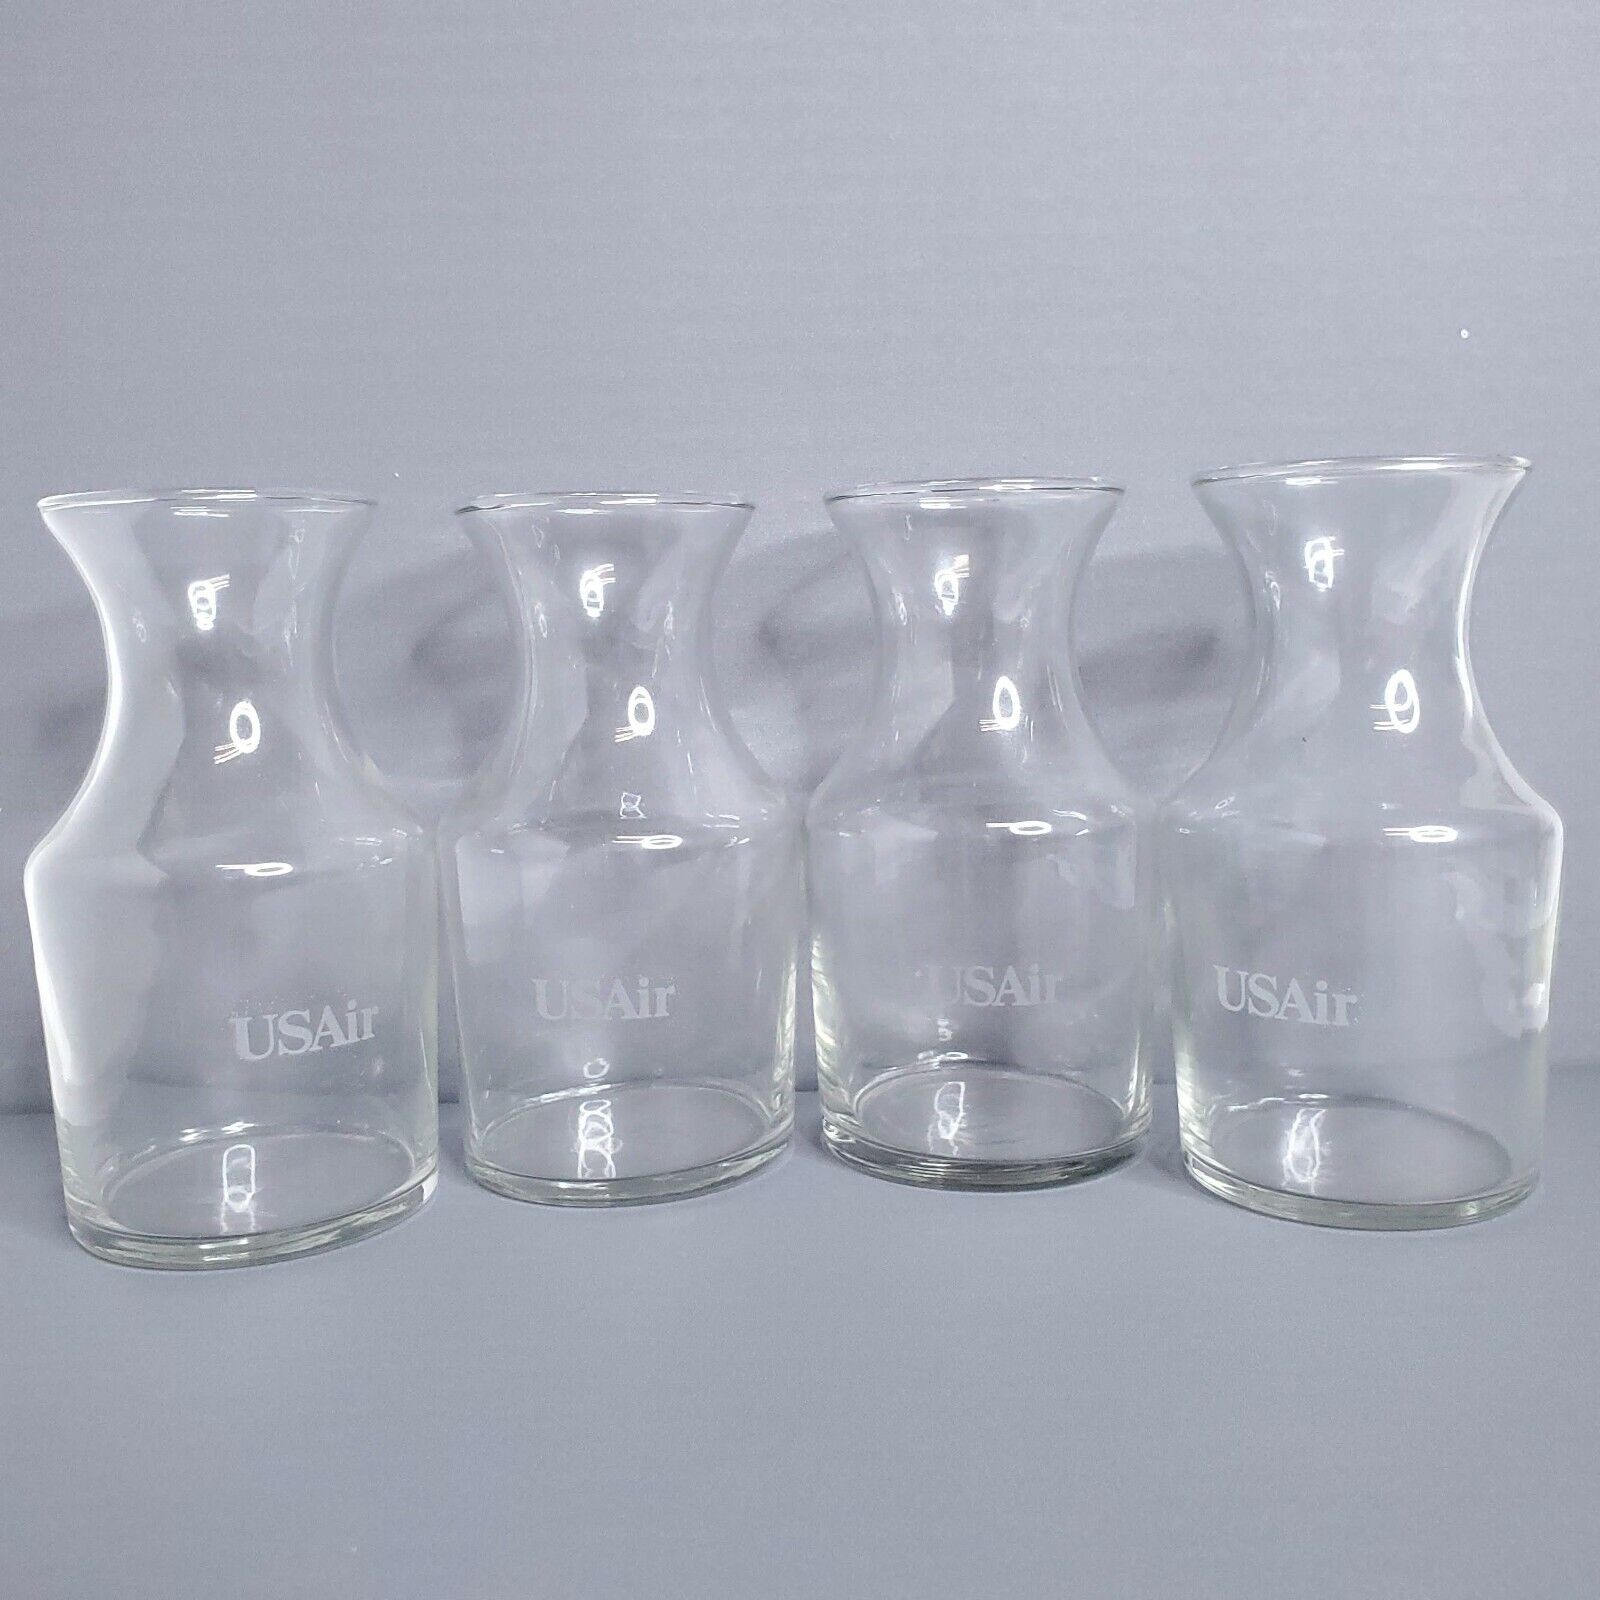 Vintage USAir Airlines Cocktail Decanter Bud Vase 6 Ounce Libbey Glass Set of 4